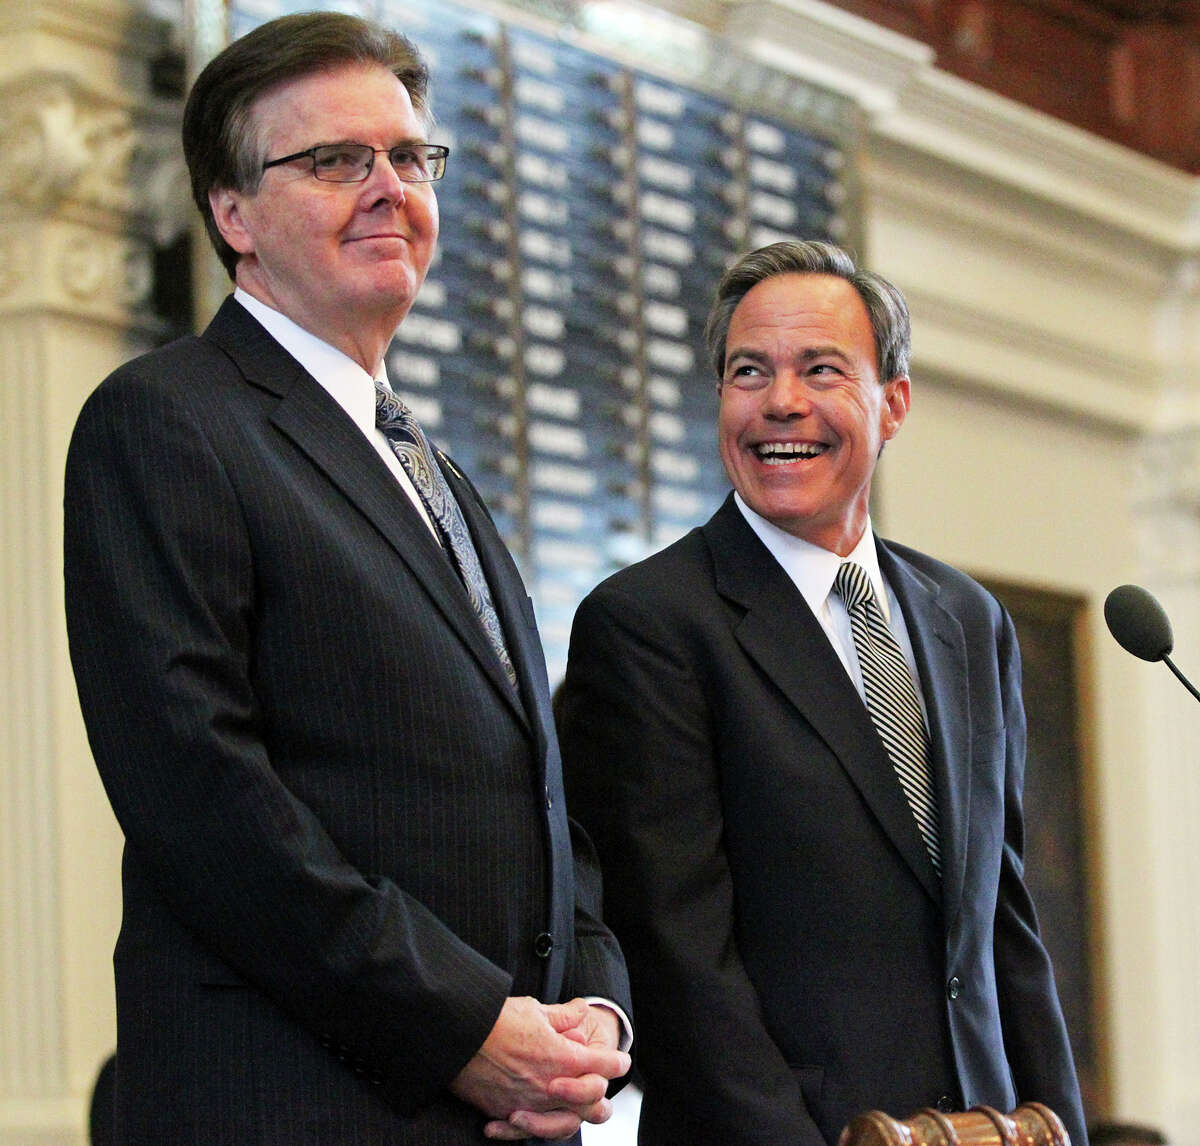 Lt. Gov. Dan Patrick and Speaker Joe Straus chat before Governor Greg Abbott delivers his State of the State address before a joint session of the Legislature held in the House of Representatives on February 17, 2015